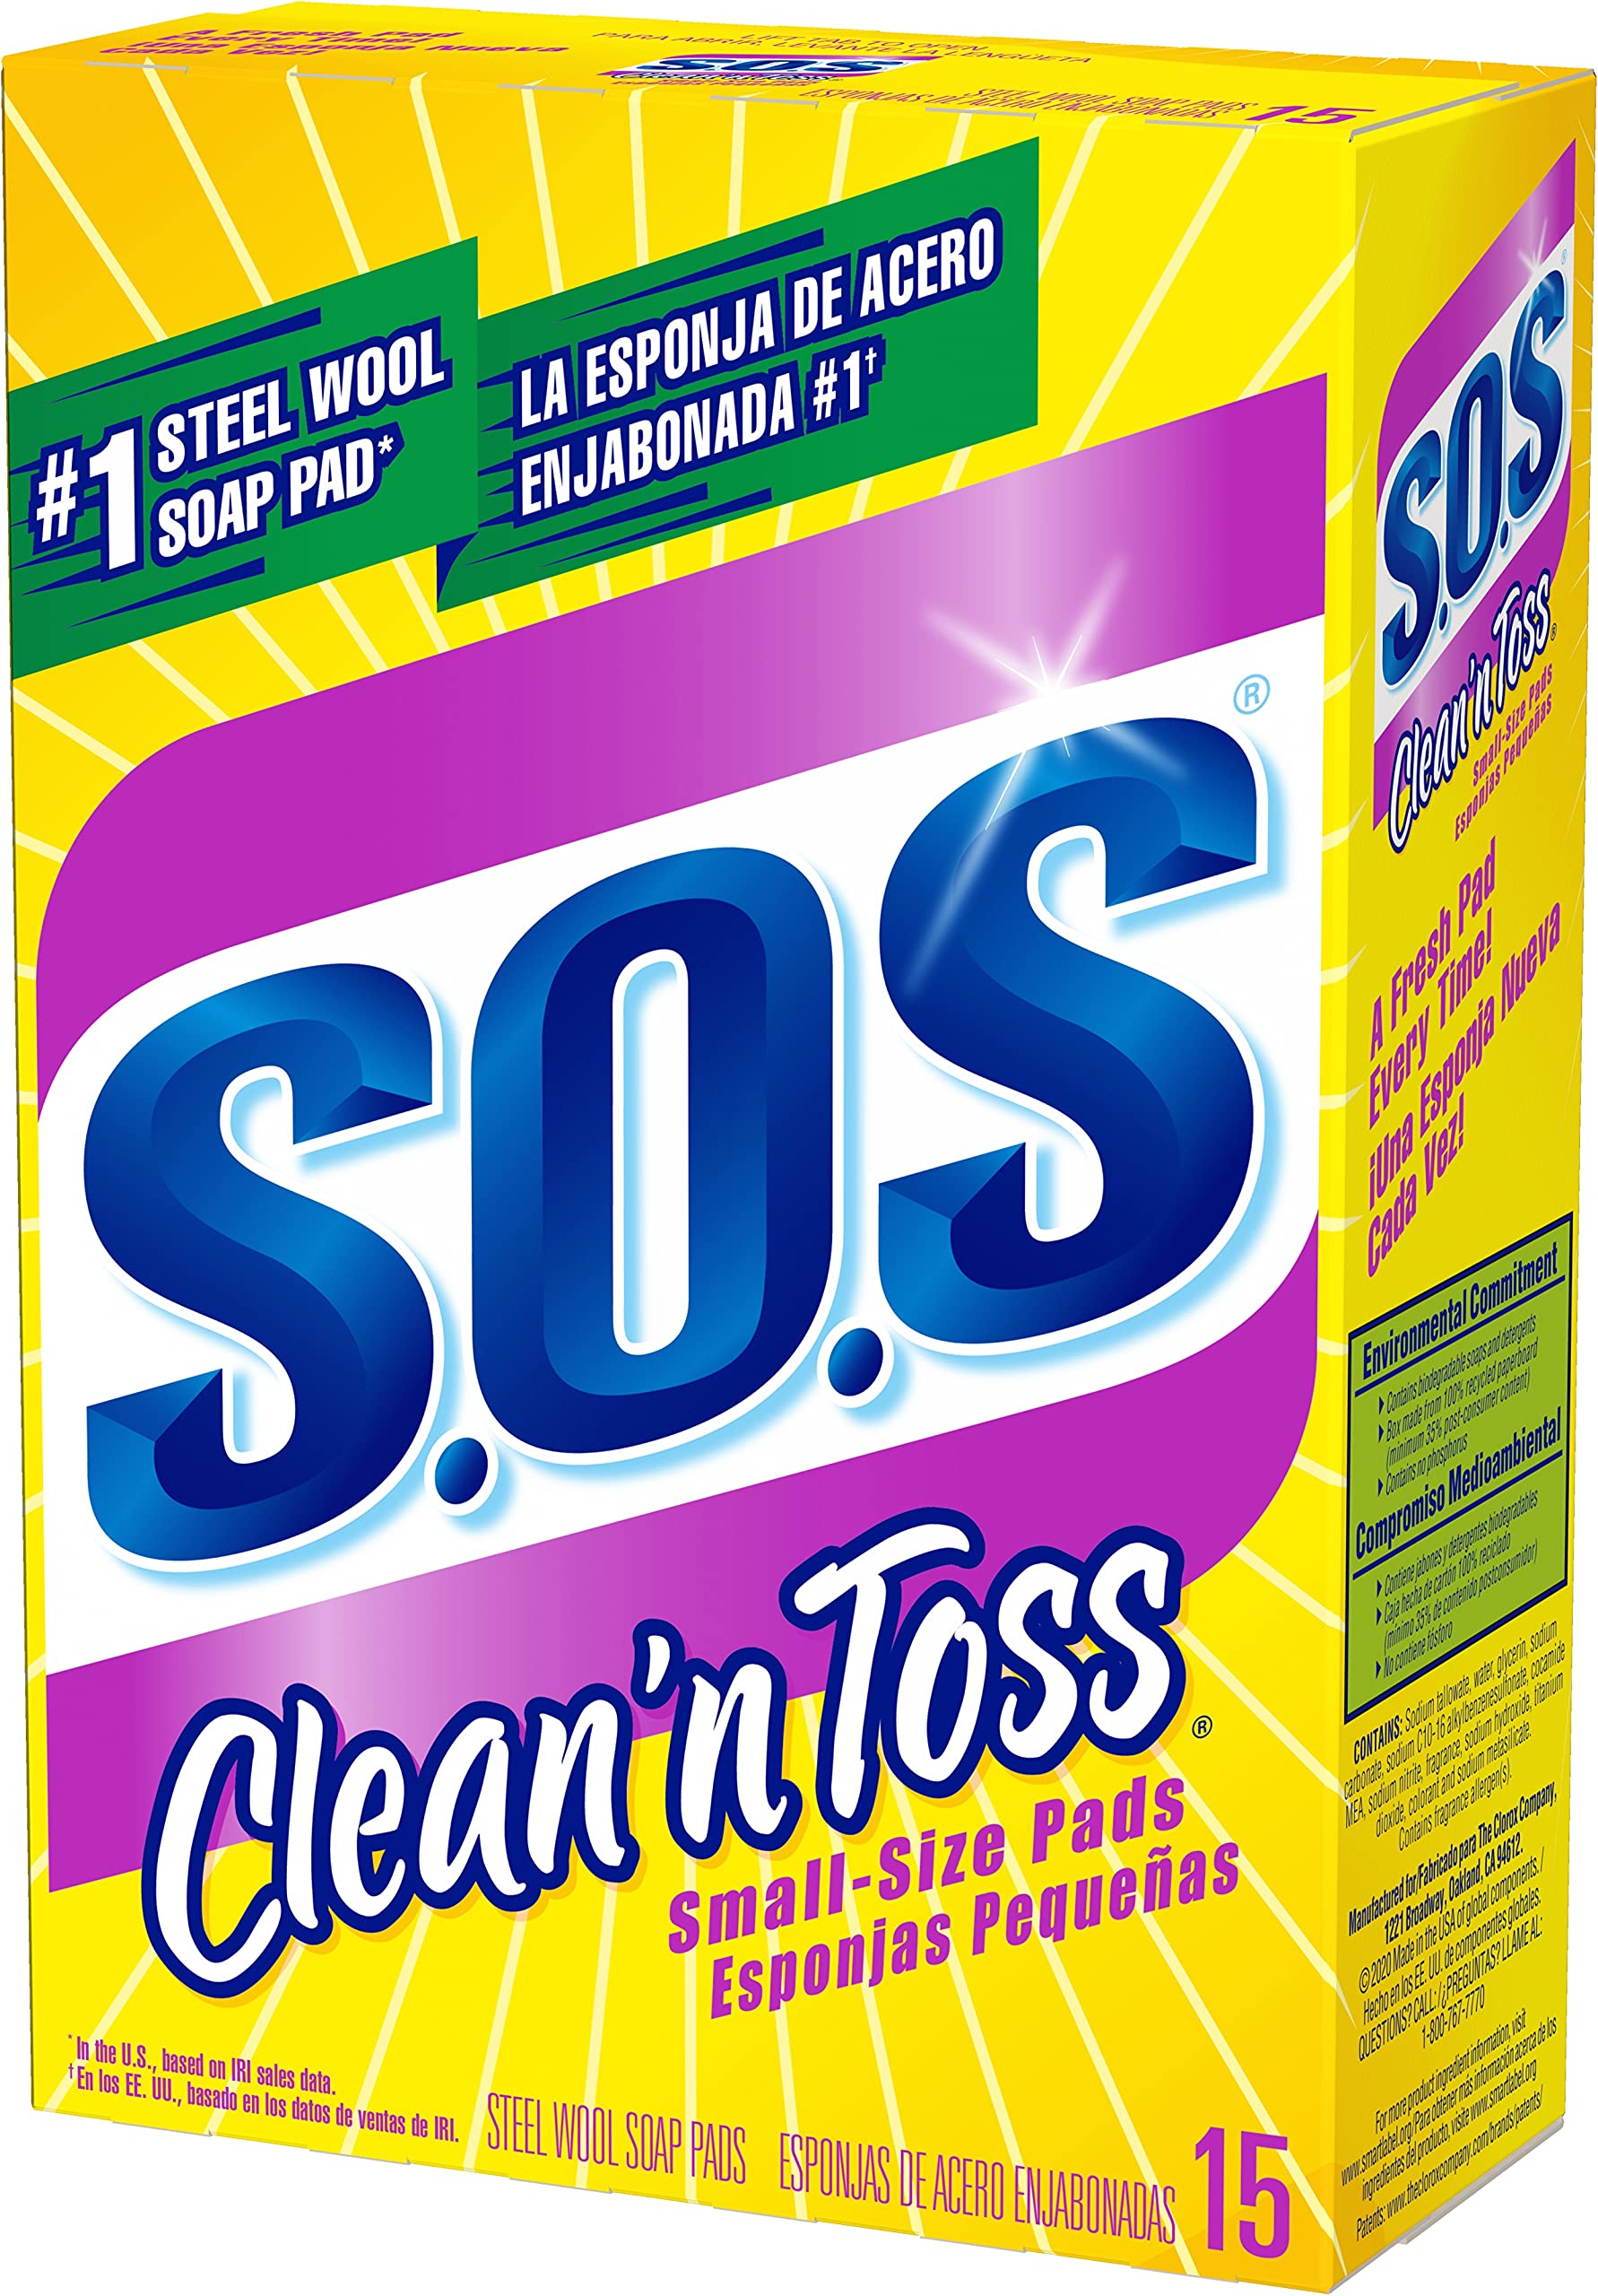 S.O.S Clean n' Toss Steel Wool Soap Pads, Home Cleaning Pads, Reusable Soap Scrubbers, Grease Cleaner, Outdoor, Bathroom or Kitchen Cleaning, Small Size Pads, 15 Count